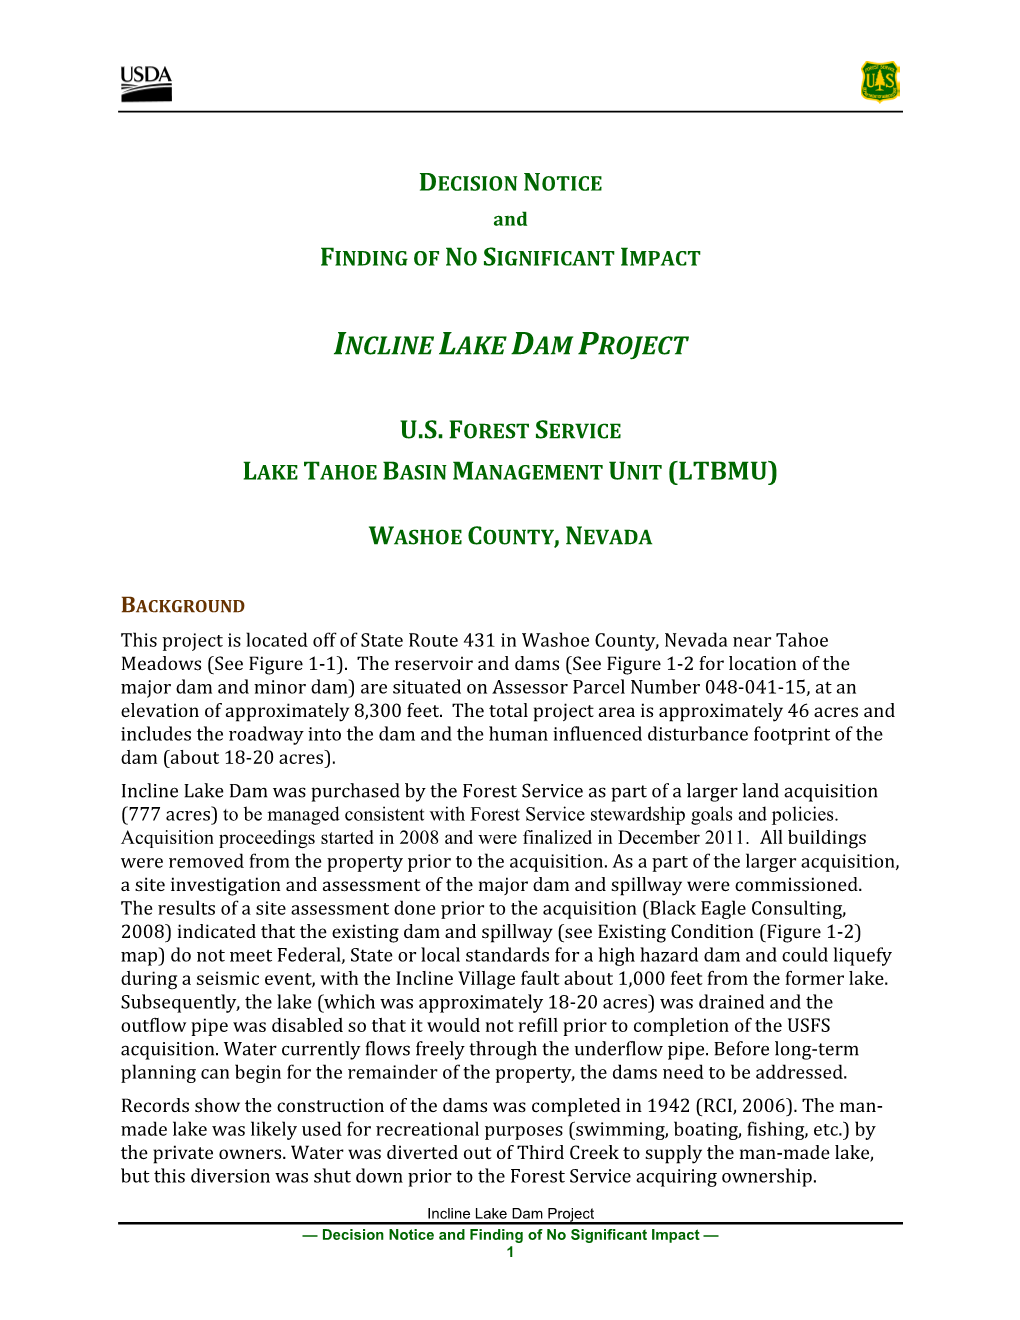 Incline Lake Dam Project Decision Notice and Finding of No Significant Impact